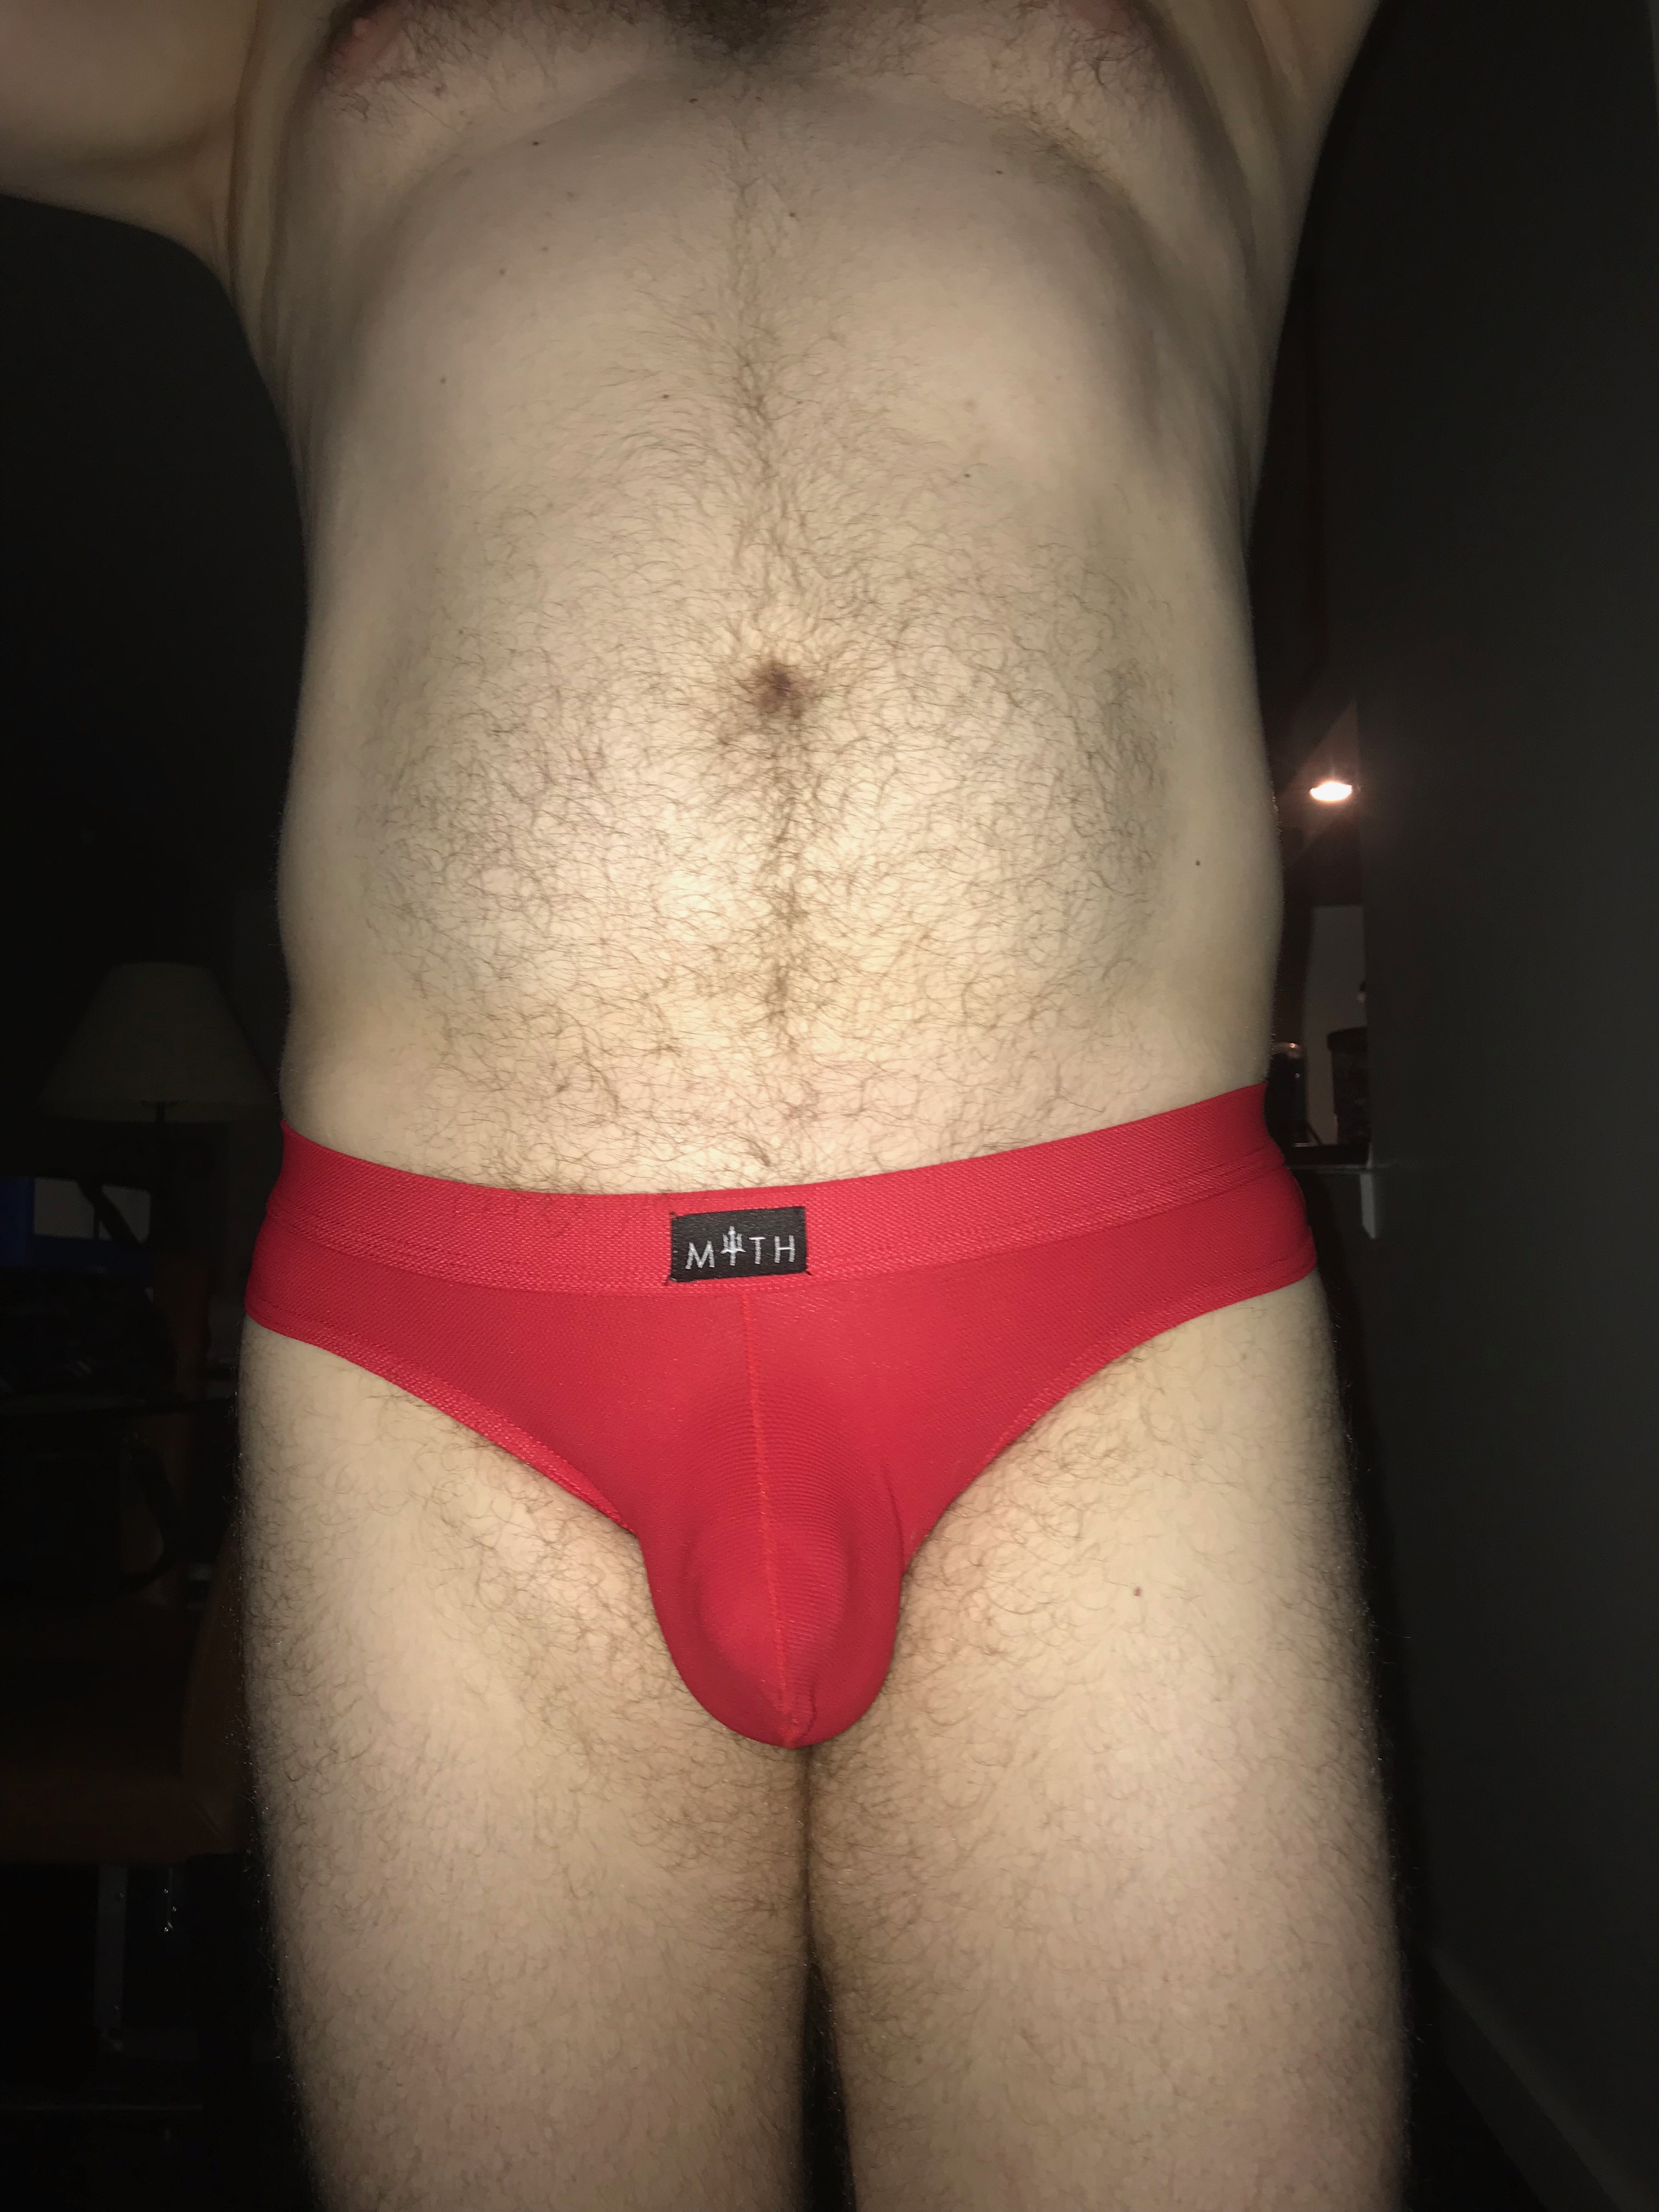 Myth Underwear in red mesh is anything but a folk tale…